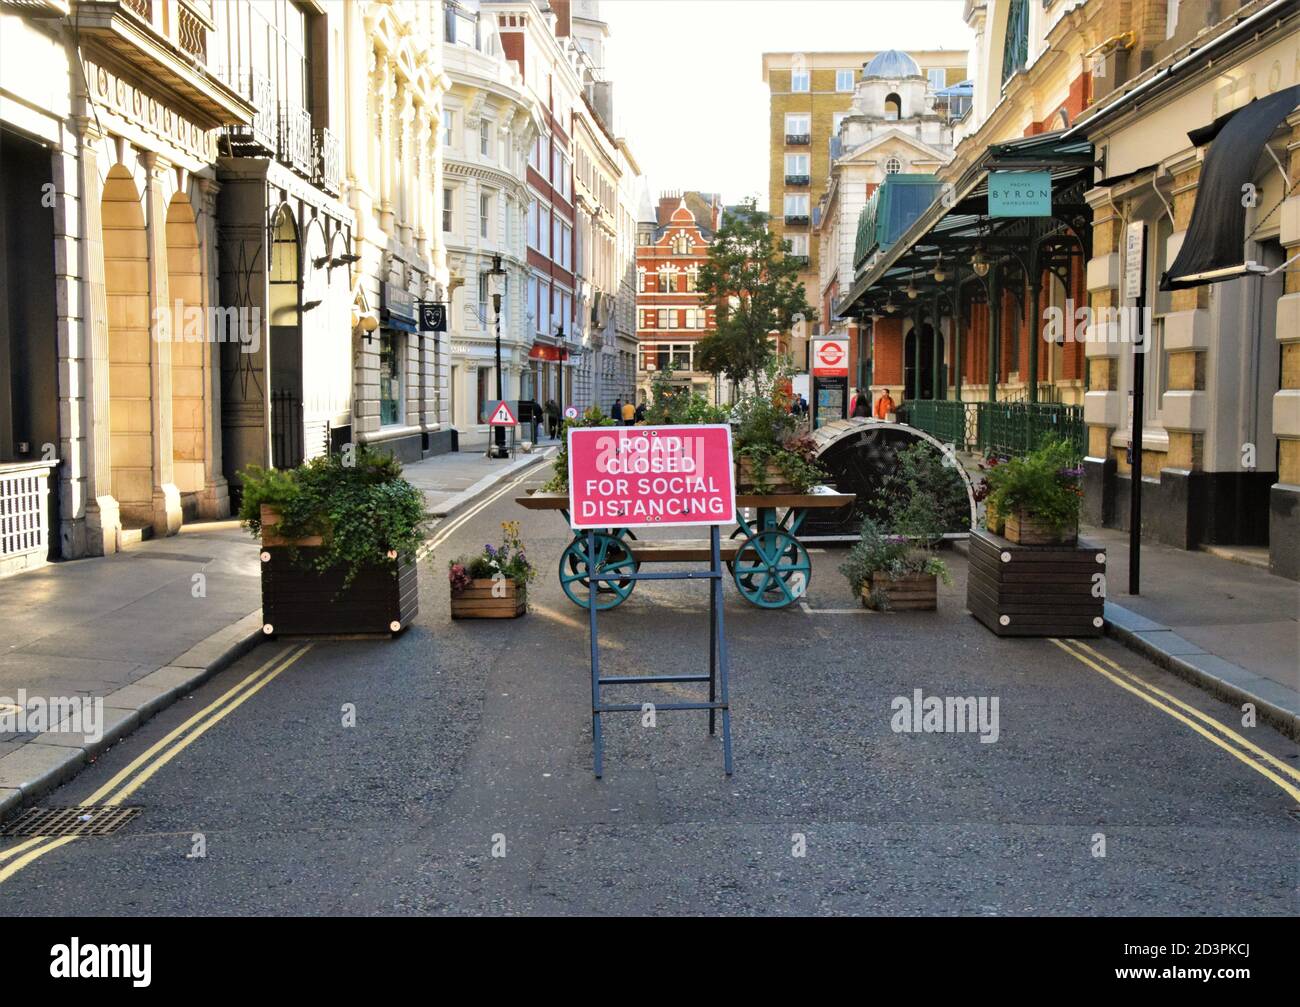 Road Closed For Social Distancing street sign in Covent Garden, London, 2020 Stock Photo